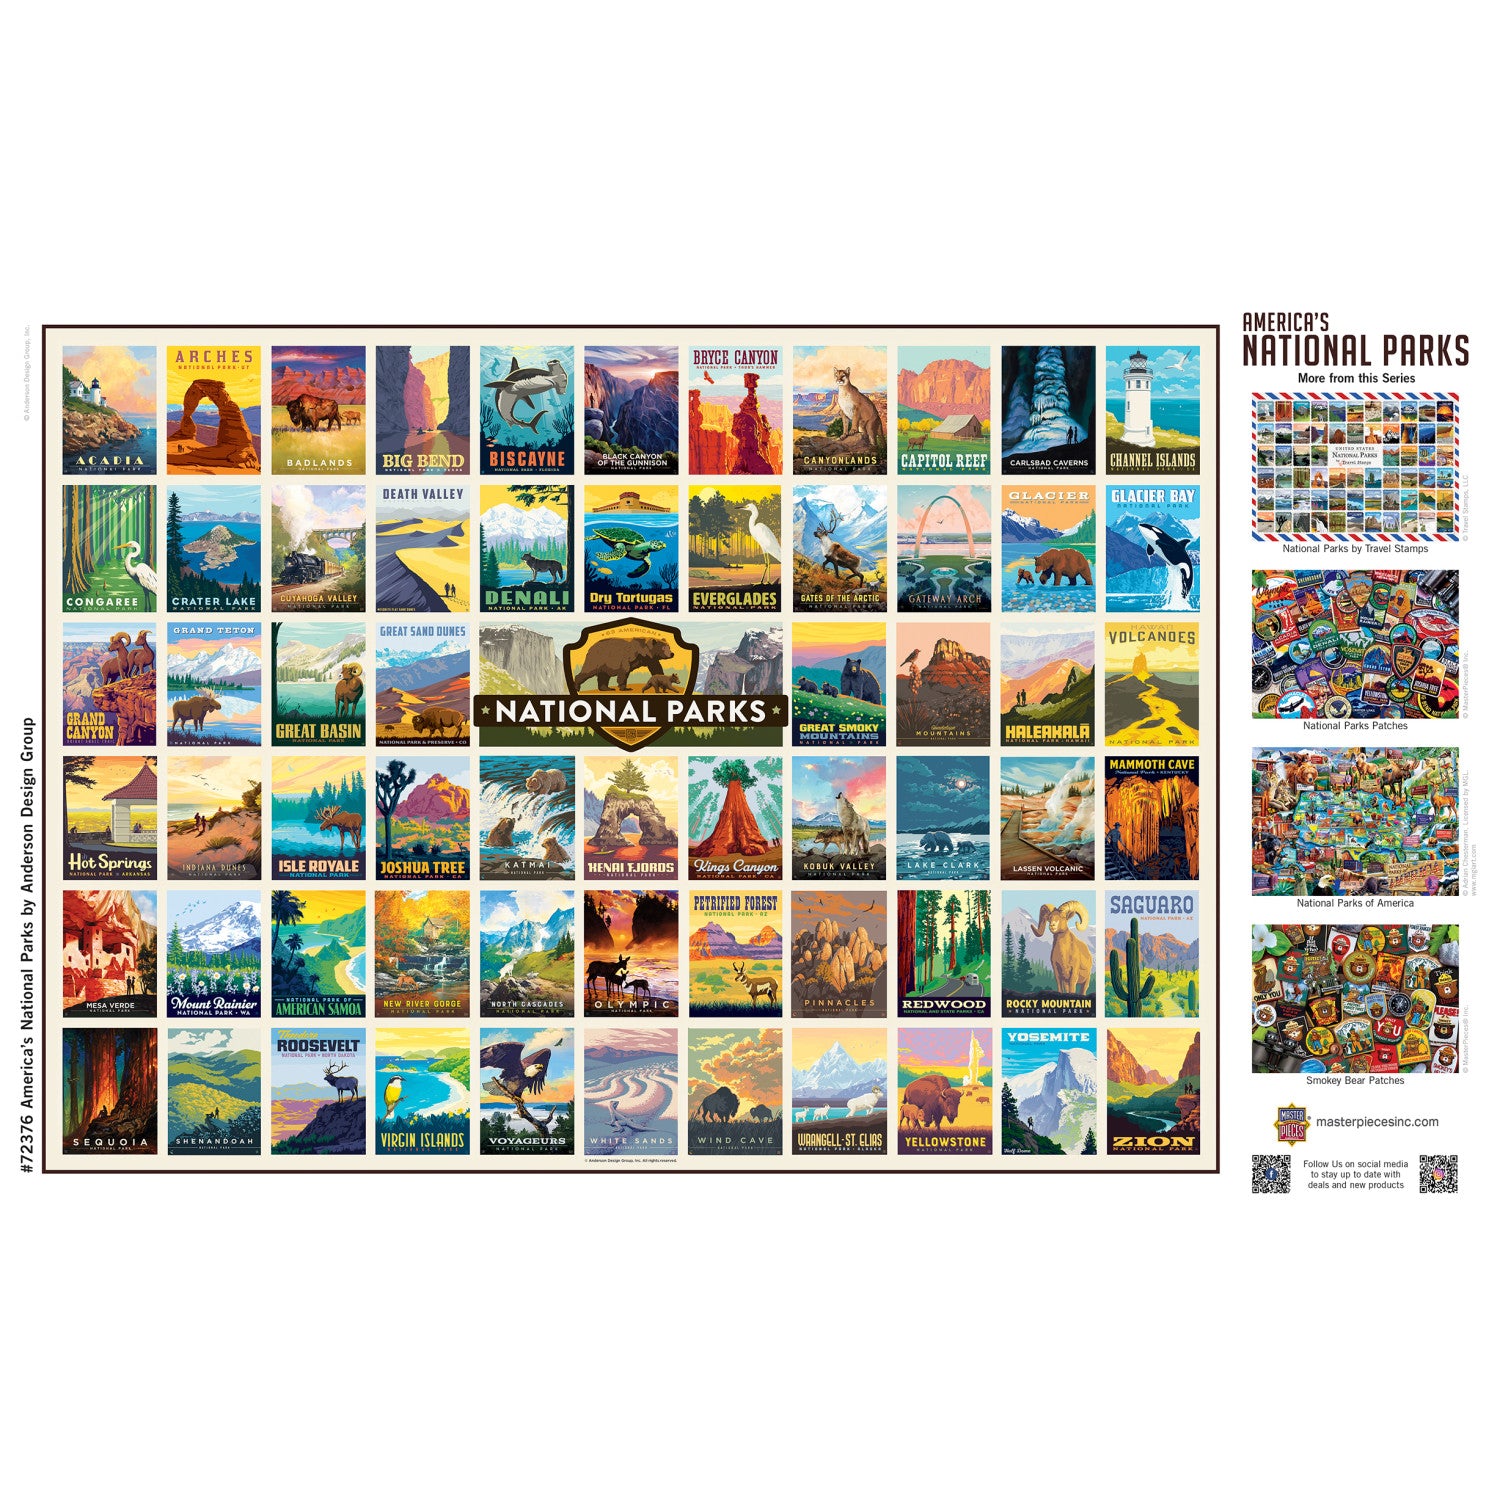 National Parks - Vintage Collage Poster Art 1000 Piece Jigsaw Puzzle